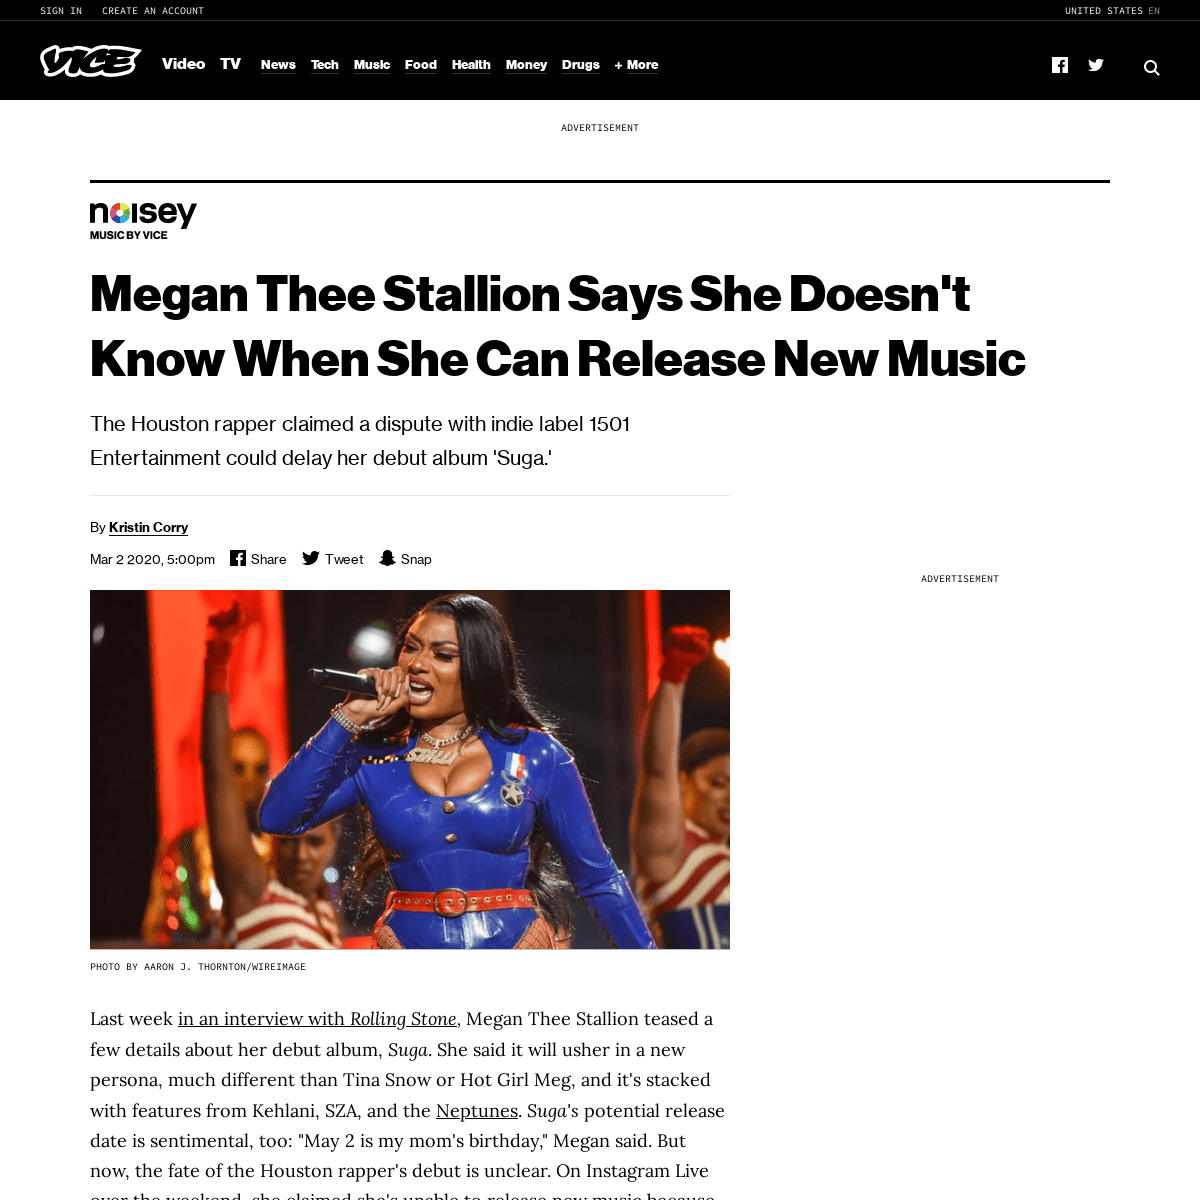 A complete backup of www.vice.com/en_us/article/884dkp/megan-thee-stallion-says-she-doesnt-know-when-she-can-release-new-music